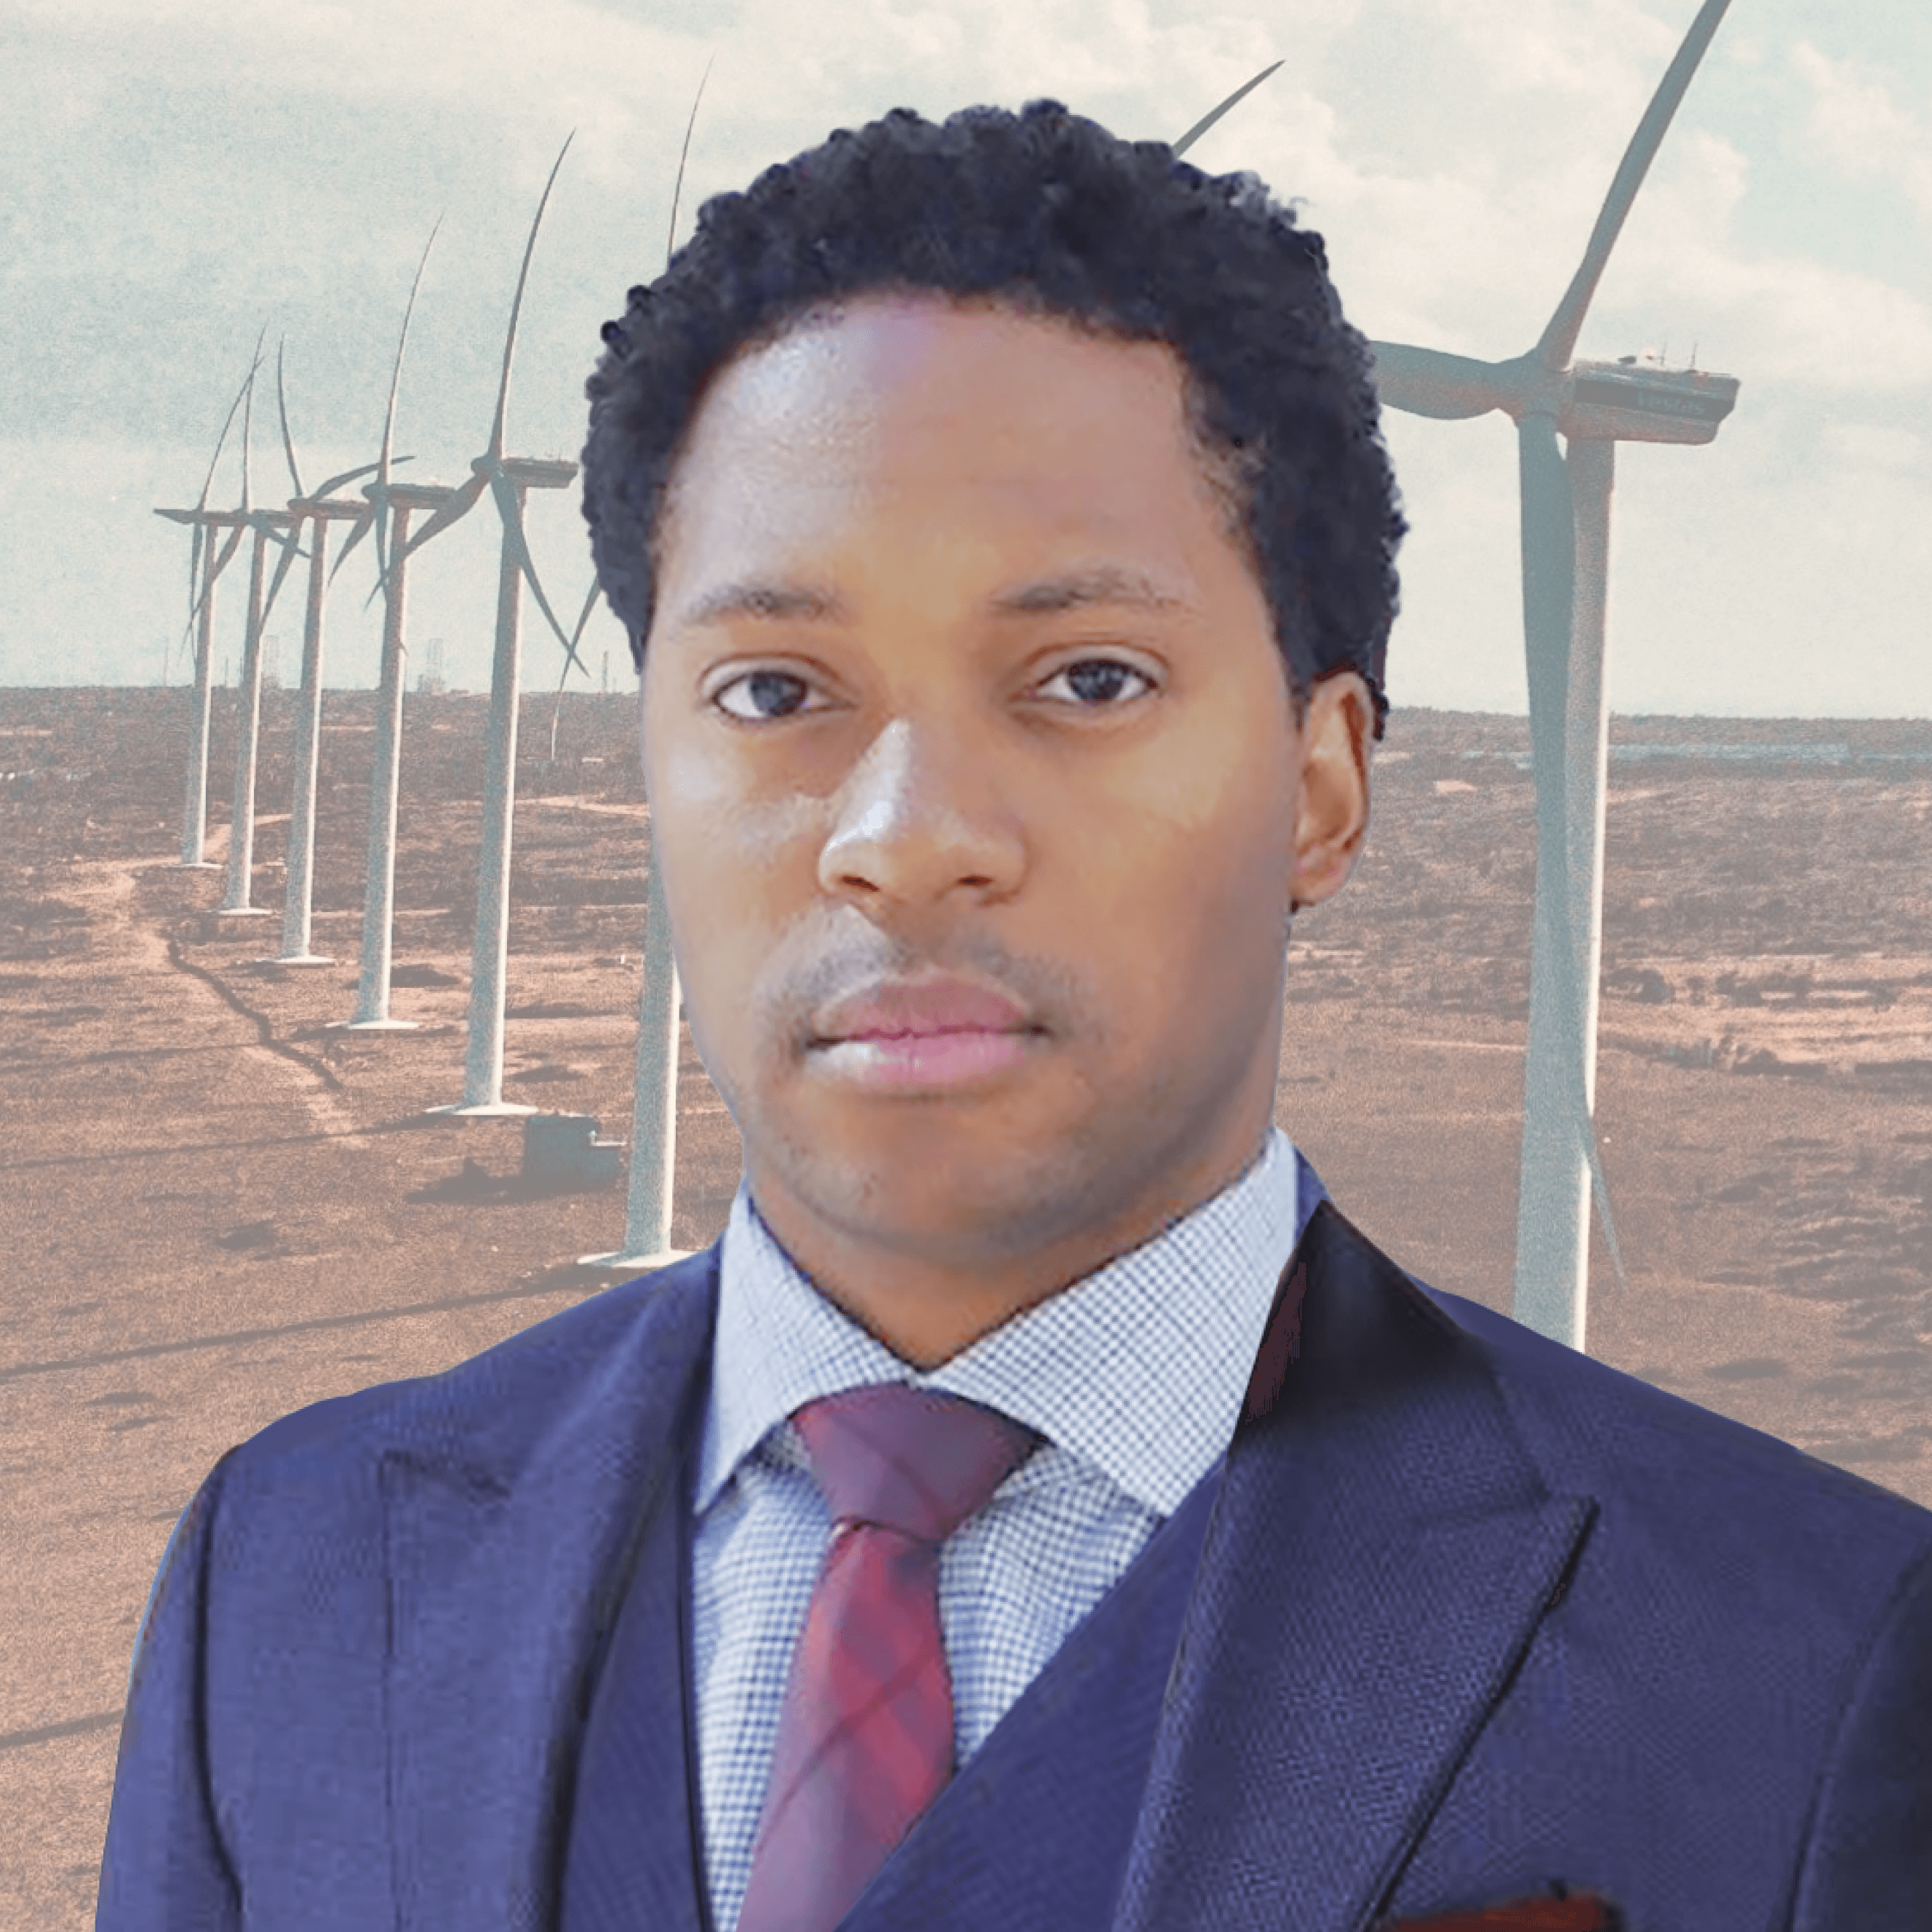 Thumbnail for "Tyrone Thomas, a Leader in Sustainable Energy".